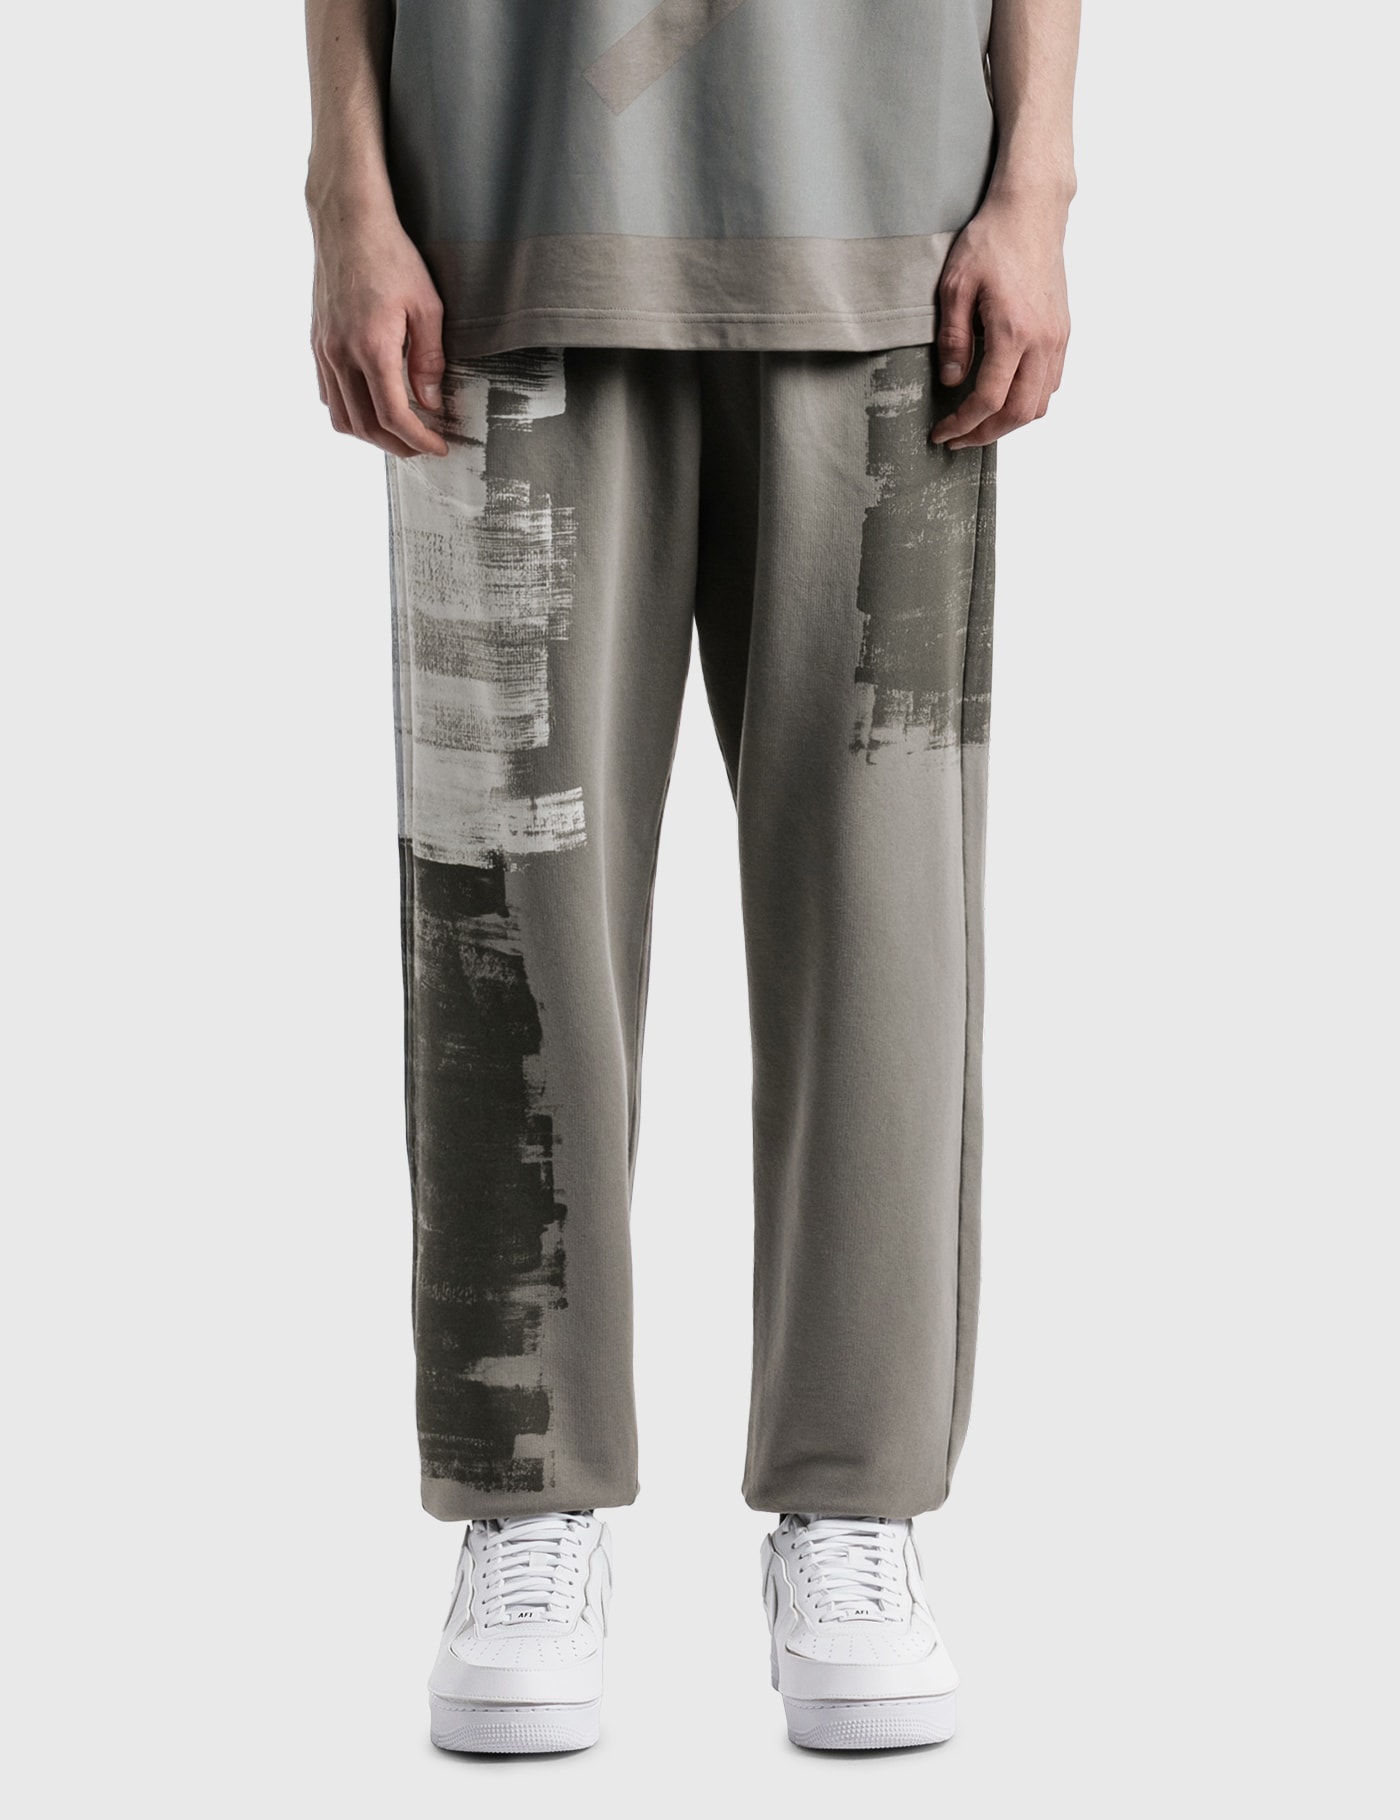 A-COLD-WALL* BRUSH STROKE SWEAT PANT